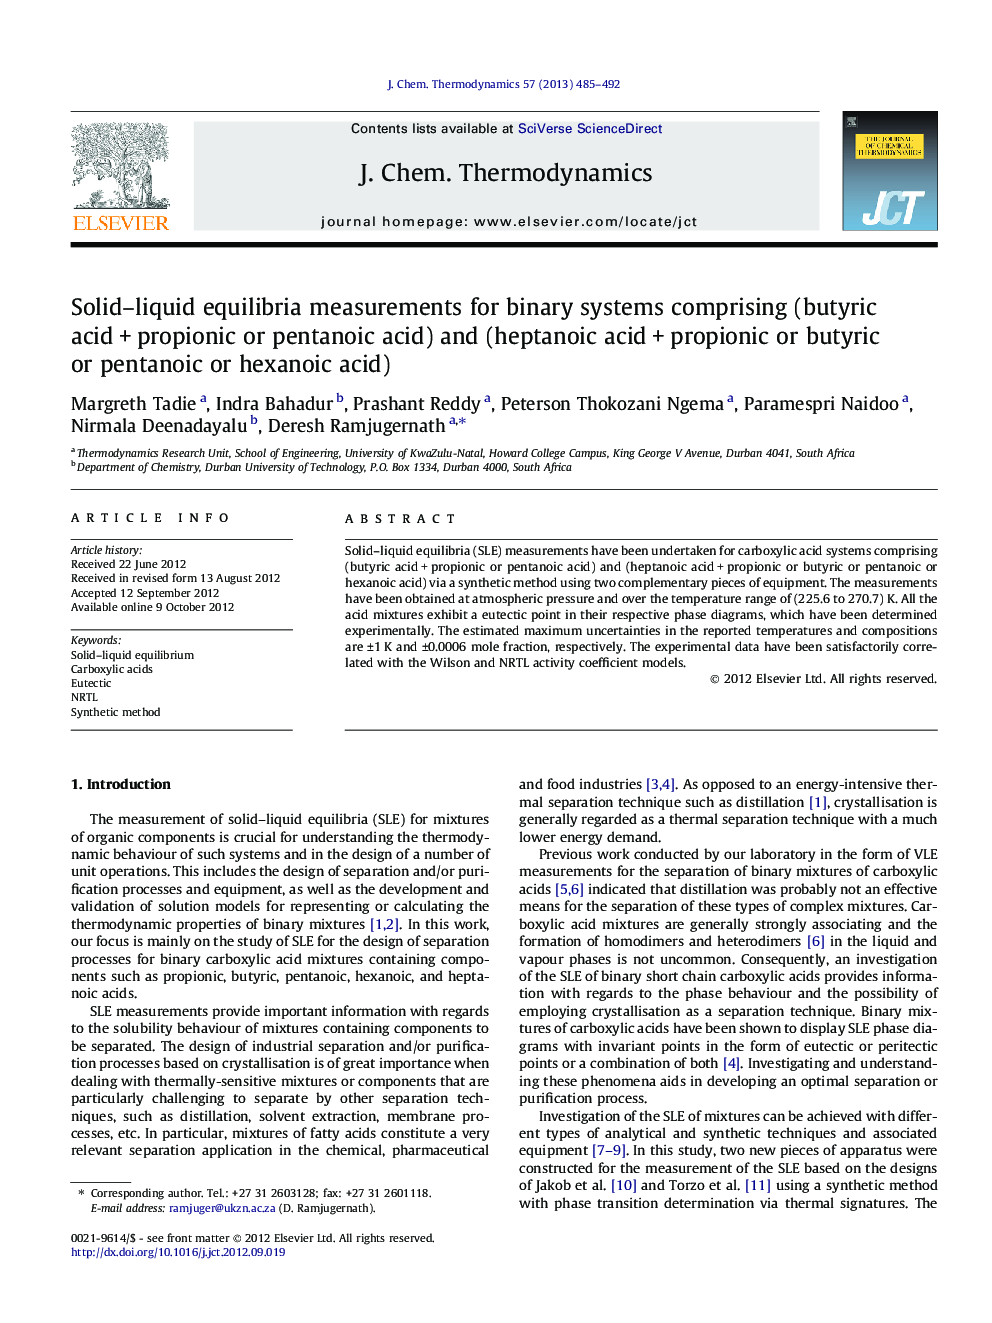 Solid–liquid equilibria measurements for binary systems comprising (butyric acid + propionic or pentanoic acid) and (heptanoic acid + propionic or butyric or pentanoic or hexanoic acid)